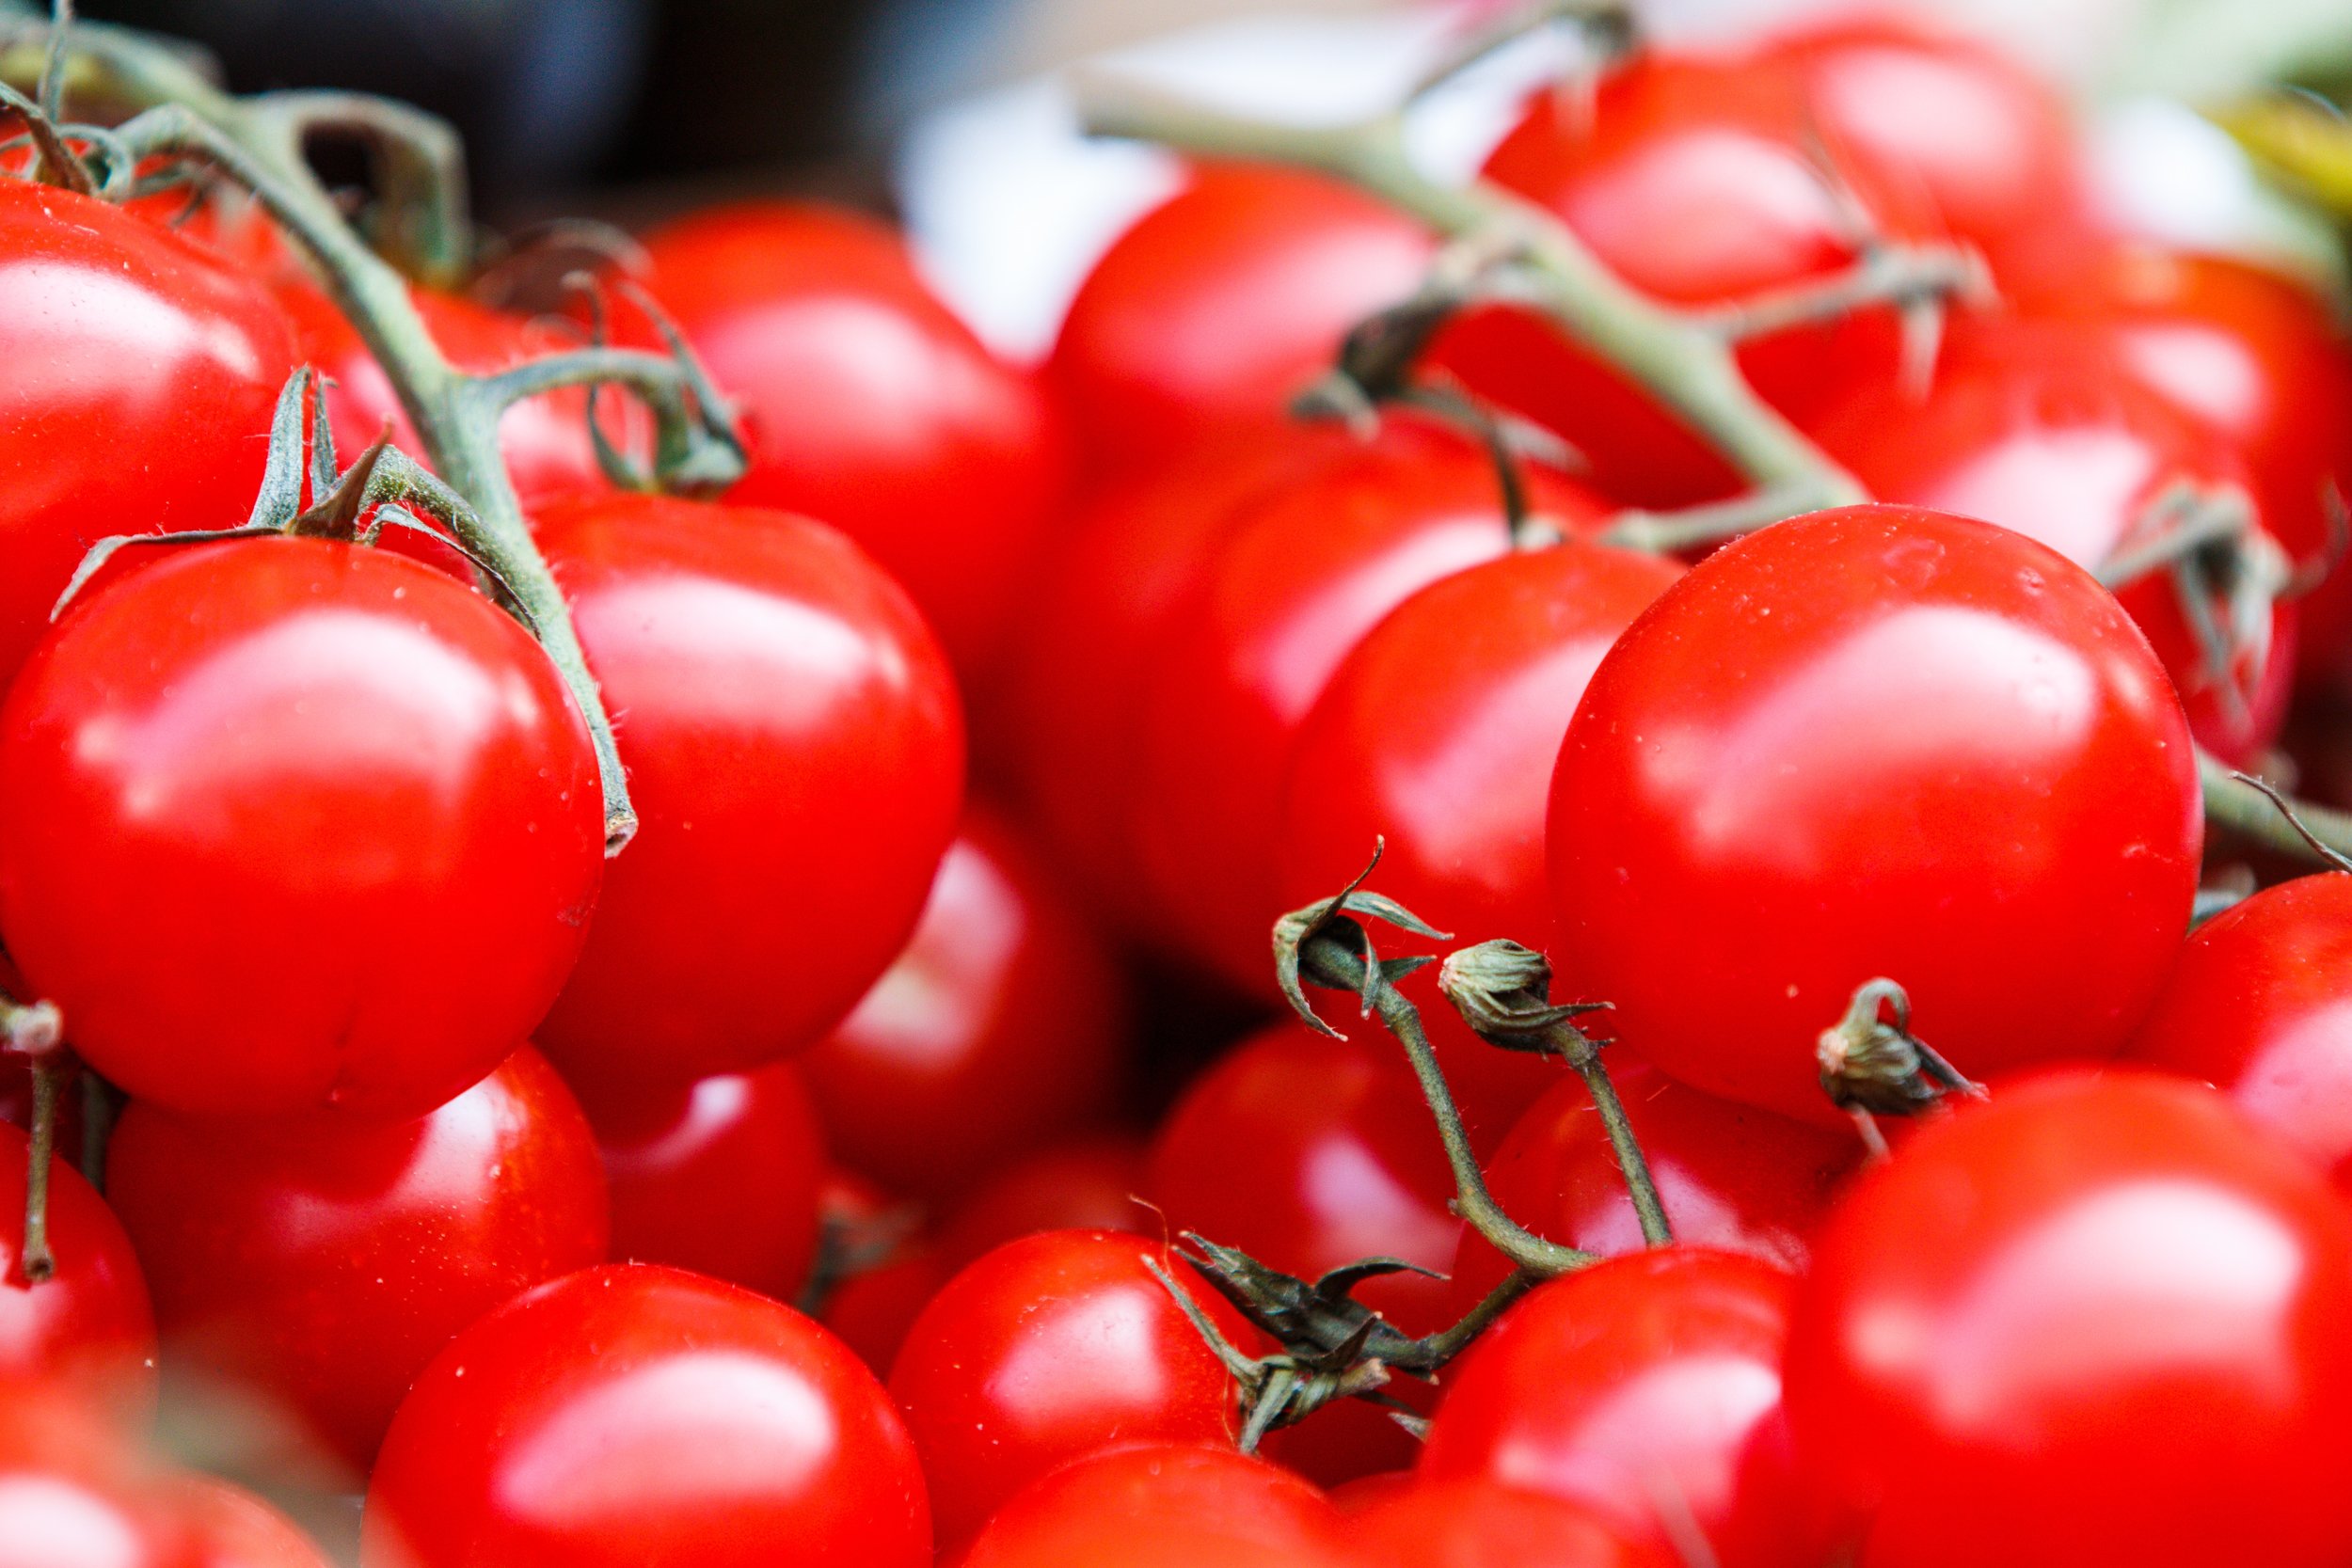 Tomatoes are rich in lutein, lycopene, and beta-carotene, which are antioxidants that offer skin-protective properties.